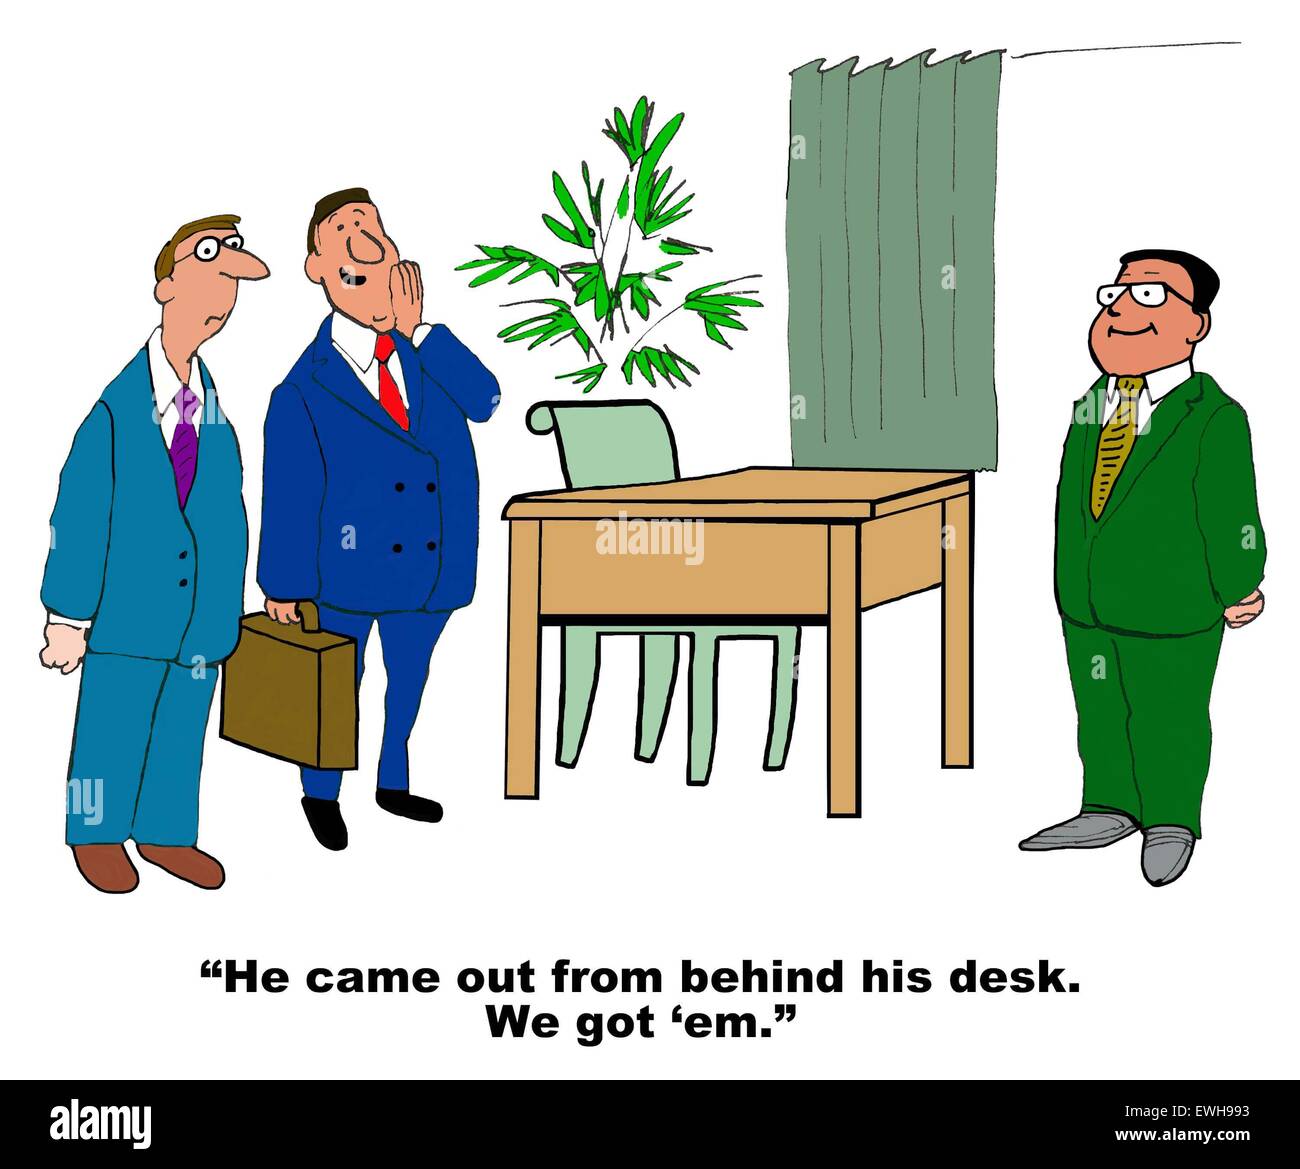 Business cartoon showing Asian businessman and American or European businessmen whispering, 'he came out from behind his desk... Stock Photo